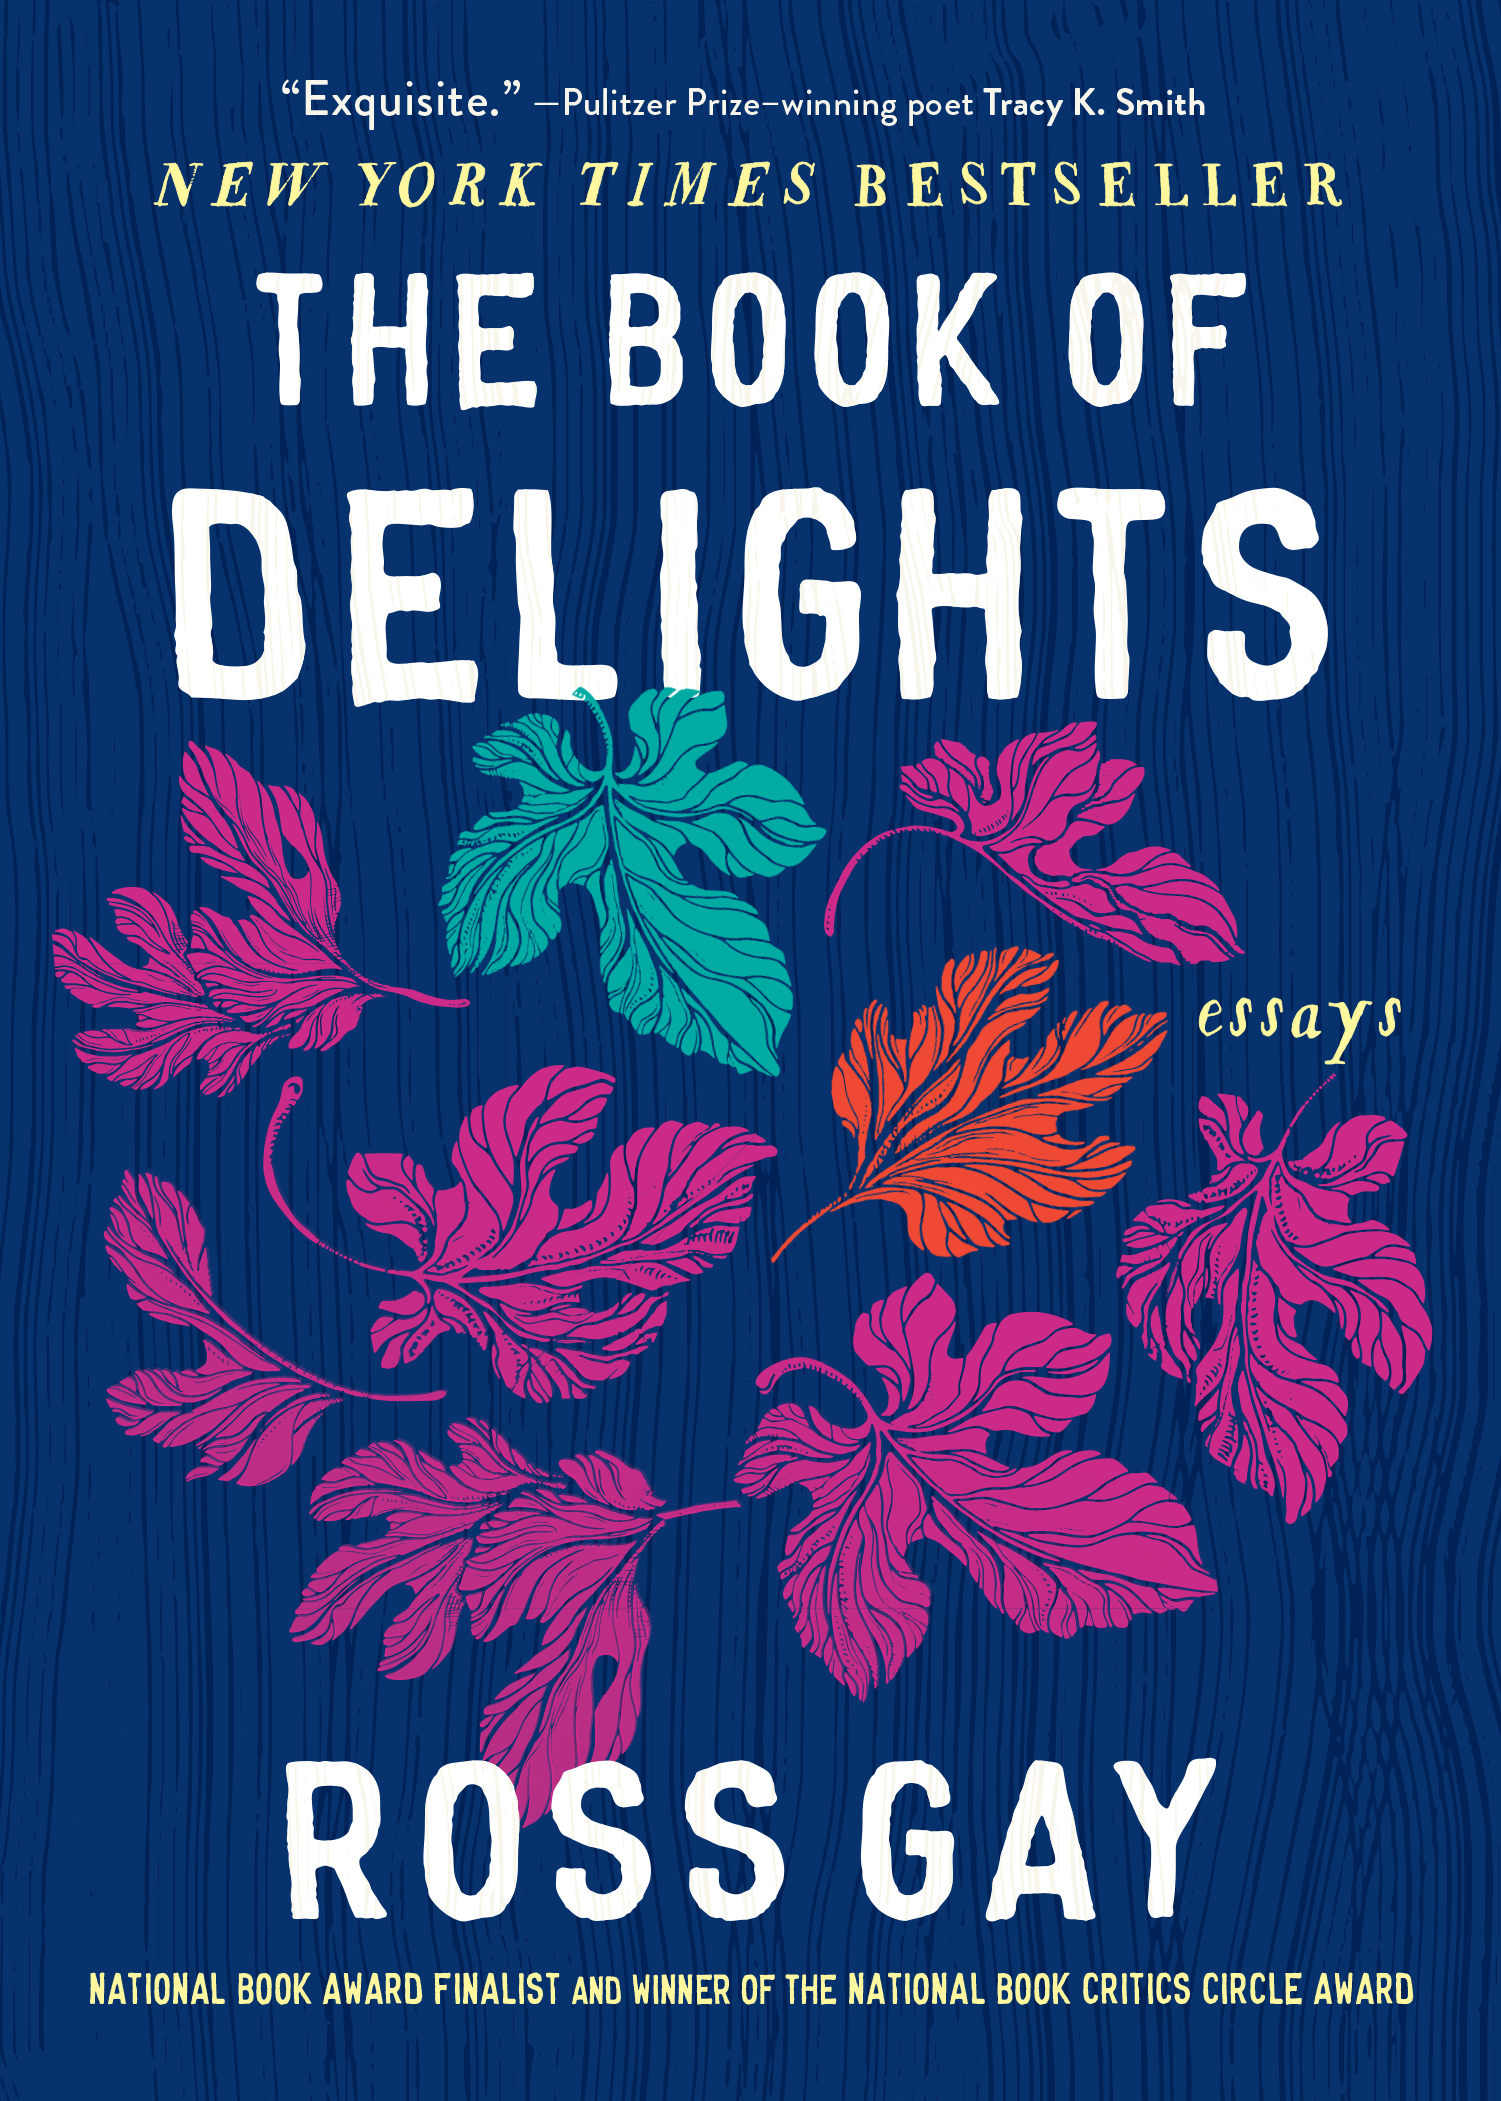 The Book of Delights by Ross Gay | Hachette Book Group